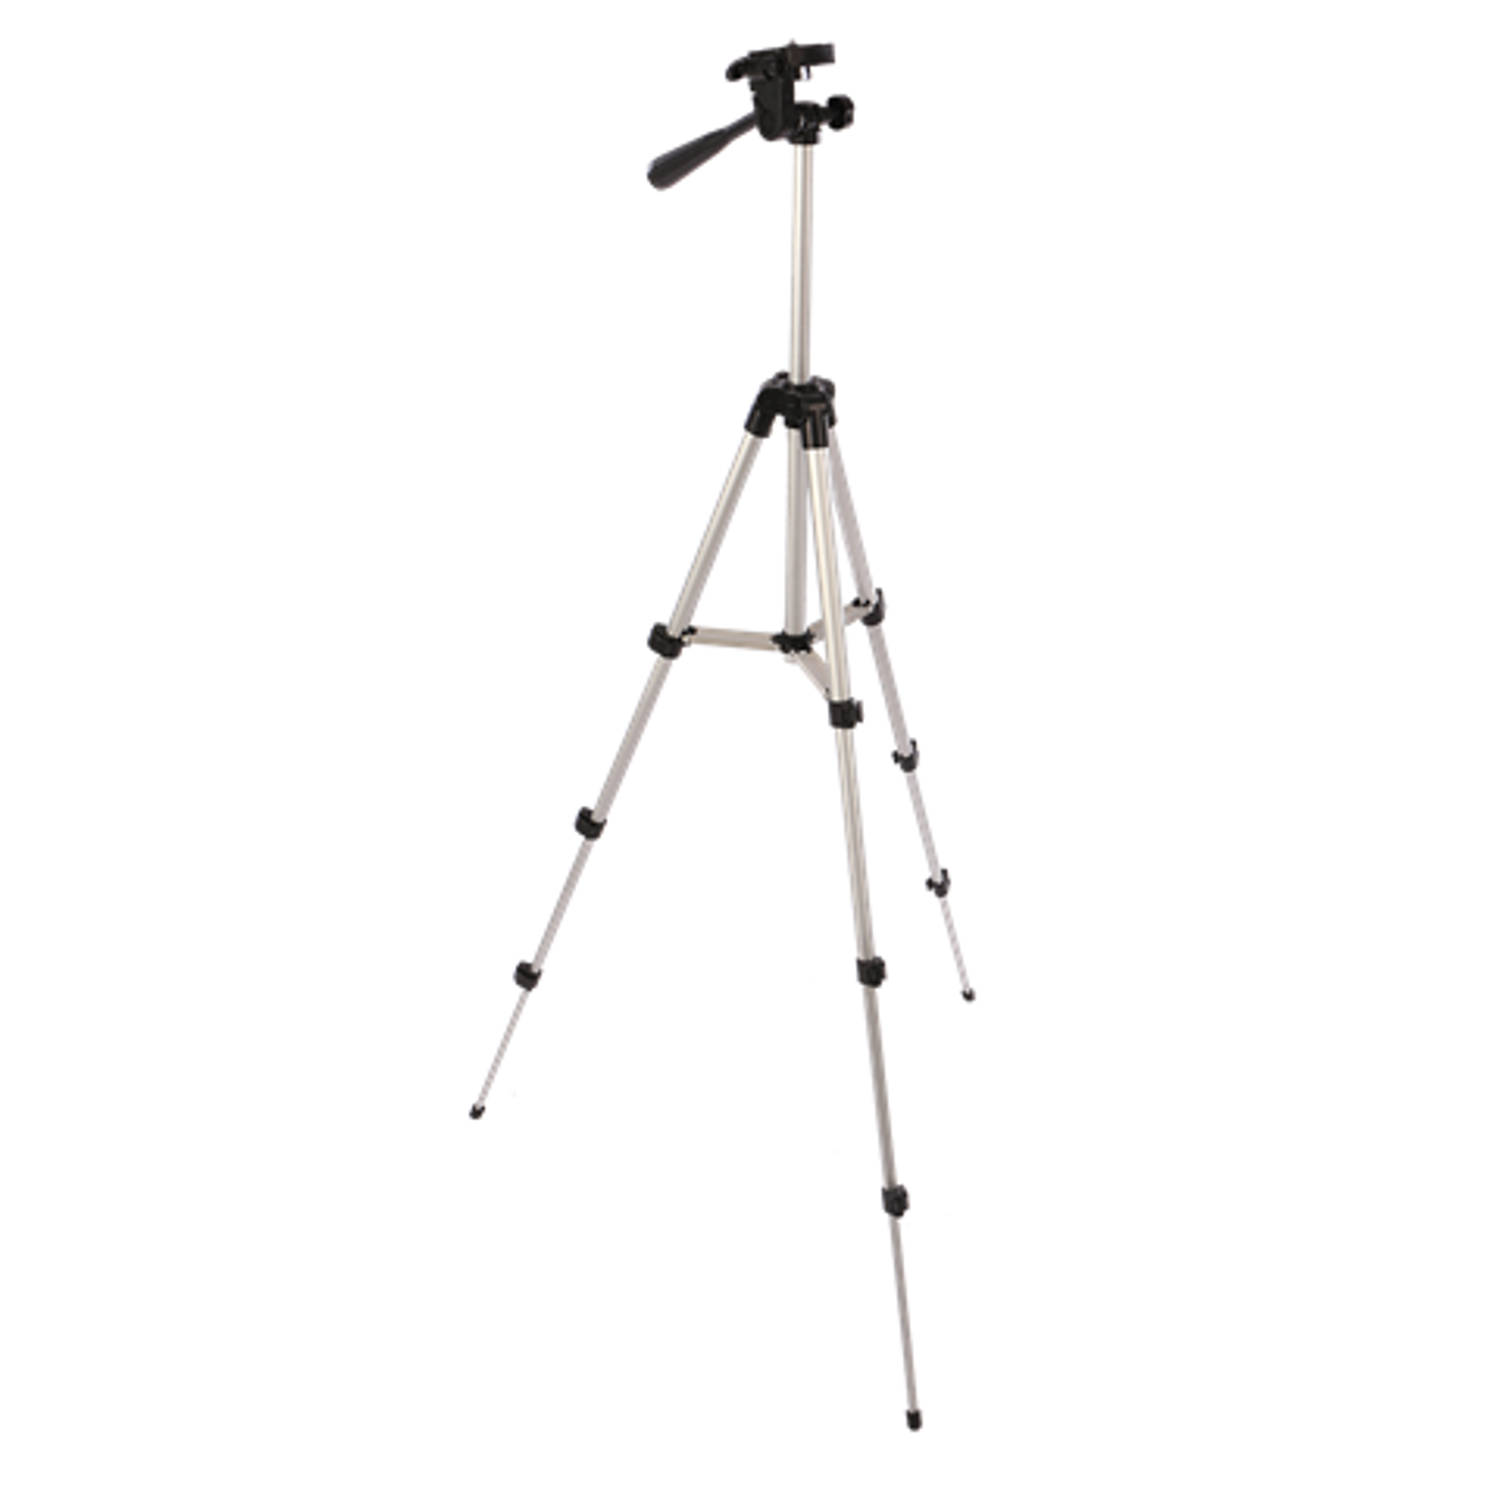 WT-3110A Light Weight Tripod (For Compact Camera)